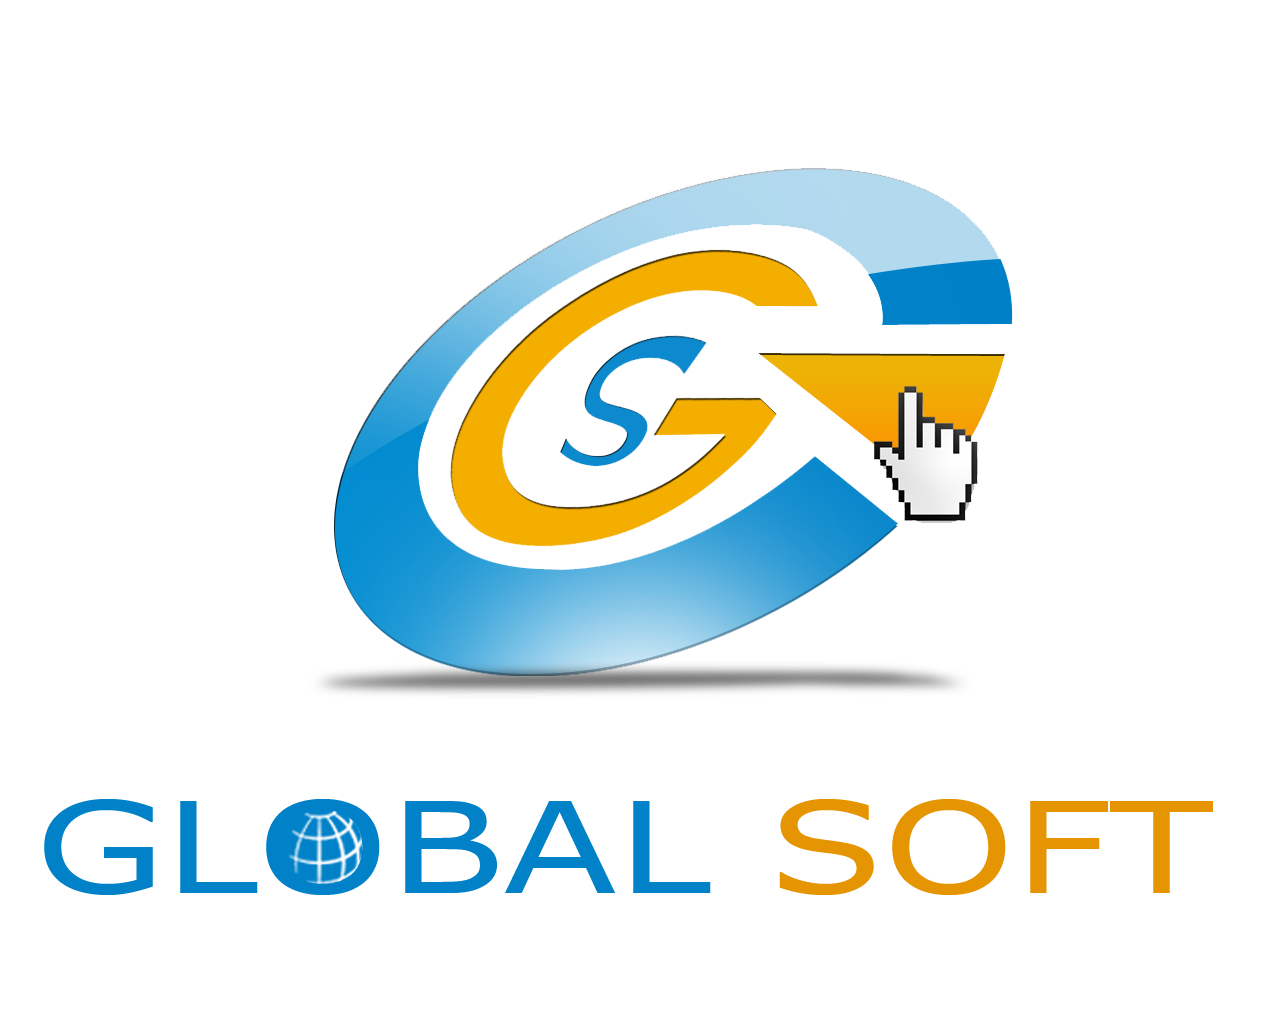 GlobalSoft | Established in 2014 for Developing & Delivering software Solutions and Applications.